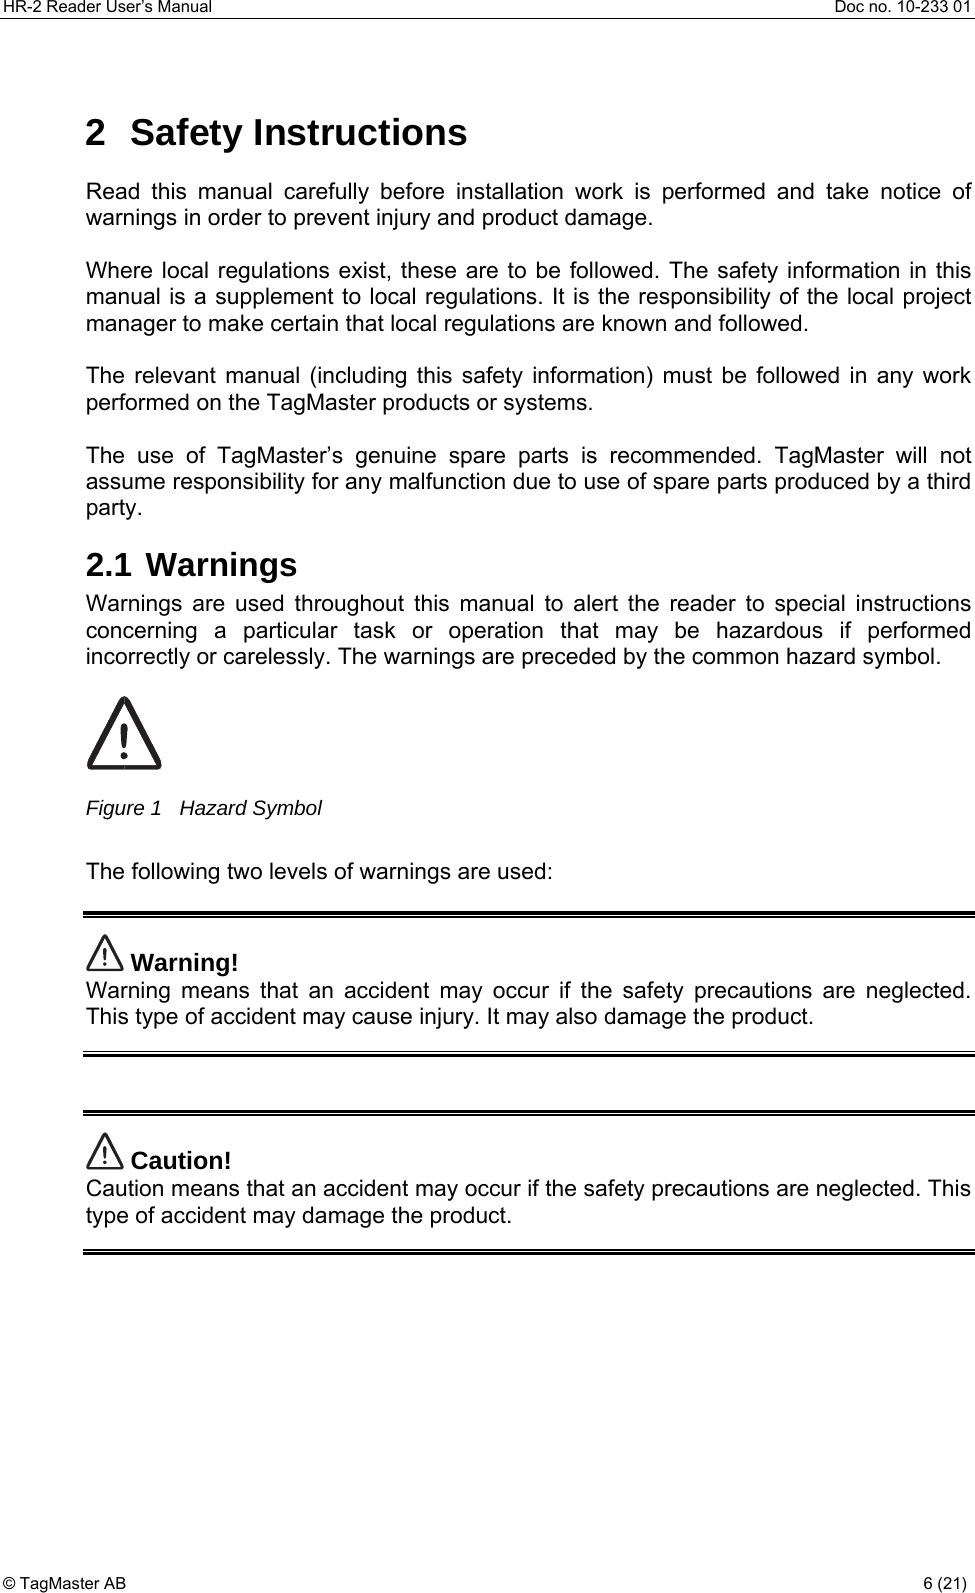 HR-2 Reader User’s Manual  Doc no. 10-233 01 © TagMaster AB  6 (21)   2 Safety Instructions Read this manual carefully before installation work is performed and take notice of warnings in order to prevent injury and product damage.   Where local regulations exist, these are to be followed. The safety information in this manual is a supplement to local regulations. It is the responsibility of the local project manager to make certain that local regulations are known and followed.  The relevant manual (including this safety information) must be followed in any work performed on the TagMaster products or systems.   The use of TagMaster’s genuine spare parts is recommended. TagMaster will not assume responsibility for any malfunction due to use of spare parts produced by a third party.  2.1 Warnings Warnings are used throughout this manual to alert the reader to special instructions concerning a particular task or operation that may be hazardous if performed incorrectly or carelessly. The warnings are preceded by the common hazard symbol.   Figure 1   Hazard Symbol  The following two levels of warnings are used:   Warning! Warning means that an accident may occur if the safety precautions are neglected. This type of accident may cause injury. It may also damage the product.    Caution! Caution means that an accident may occur if the safety precautions are neglected. This type of accident may damage the product.   